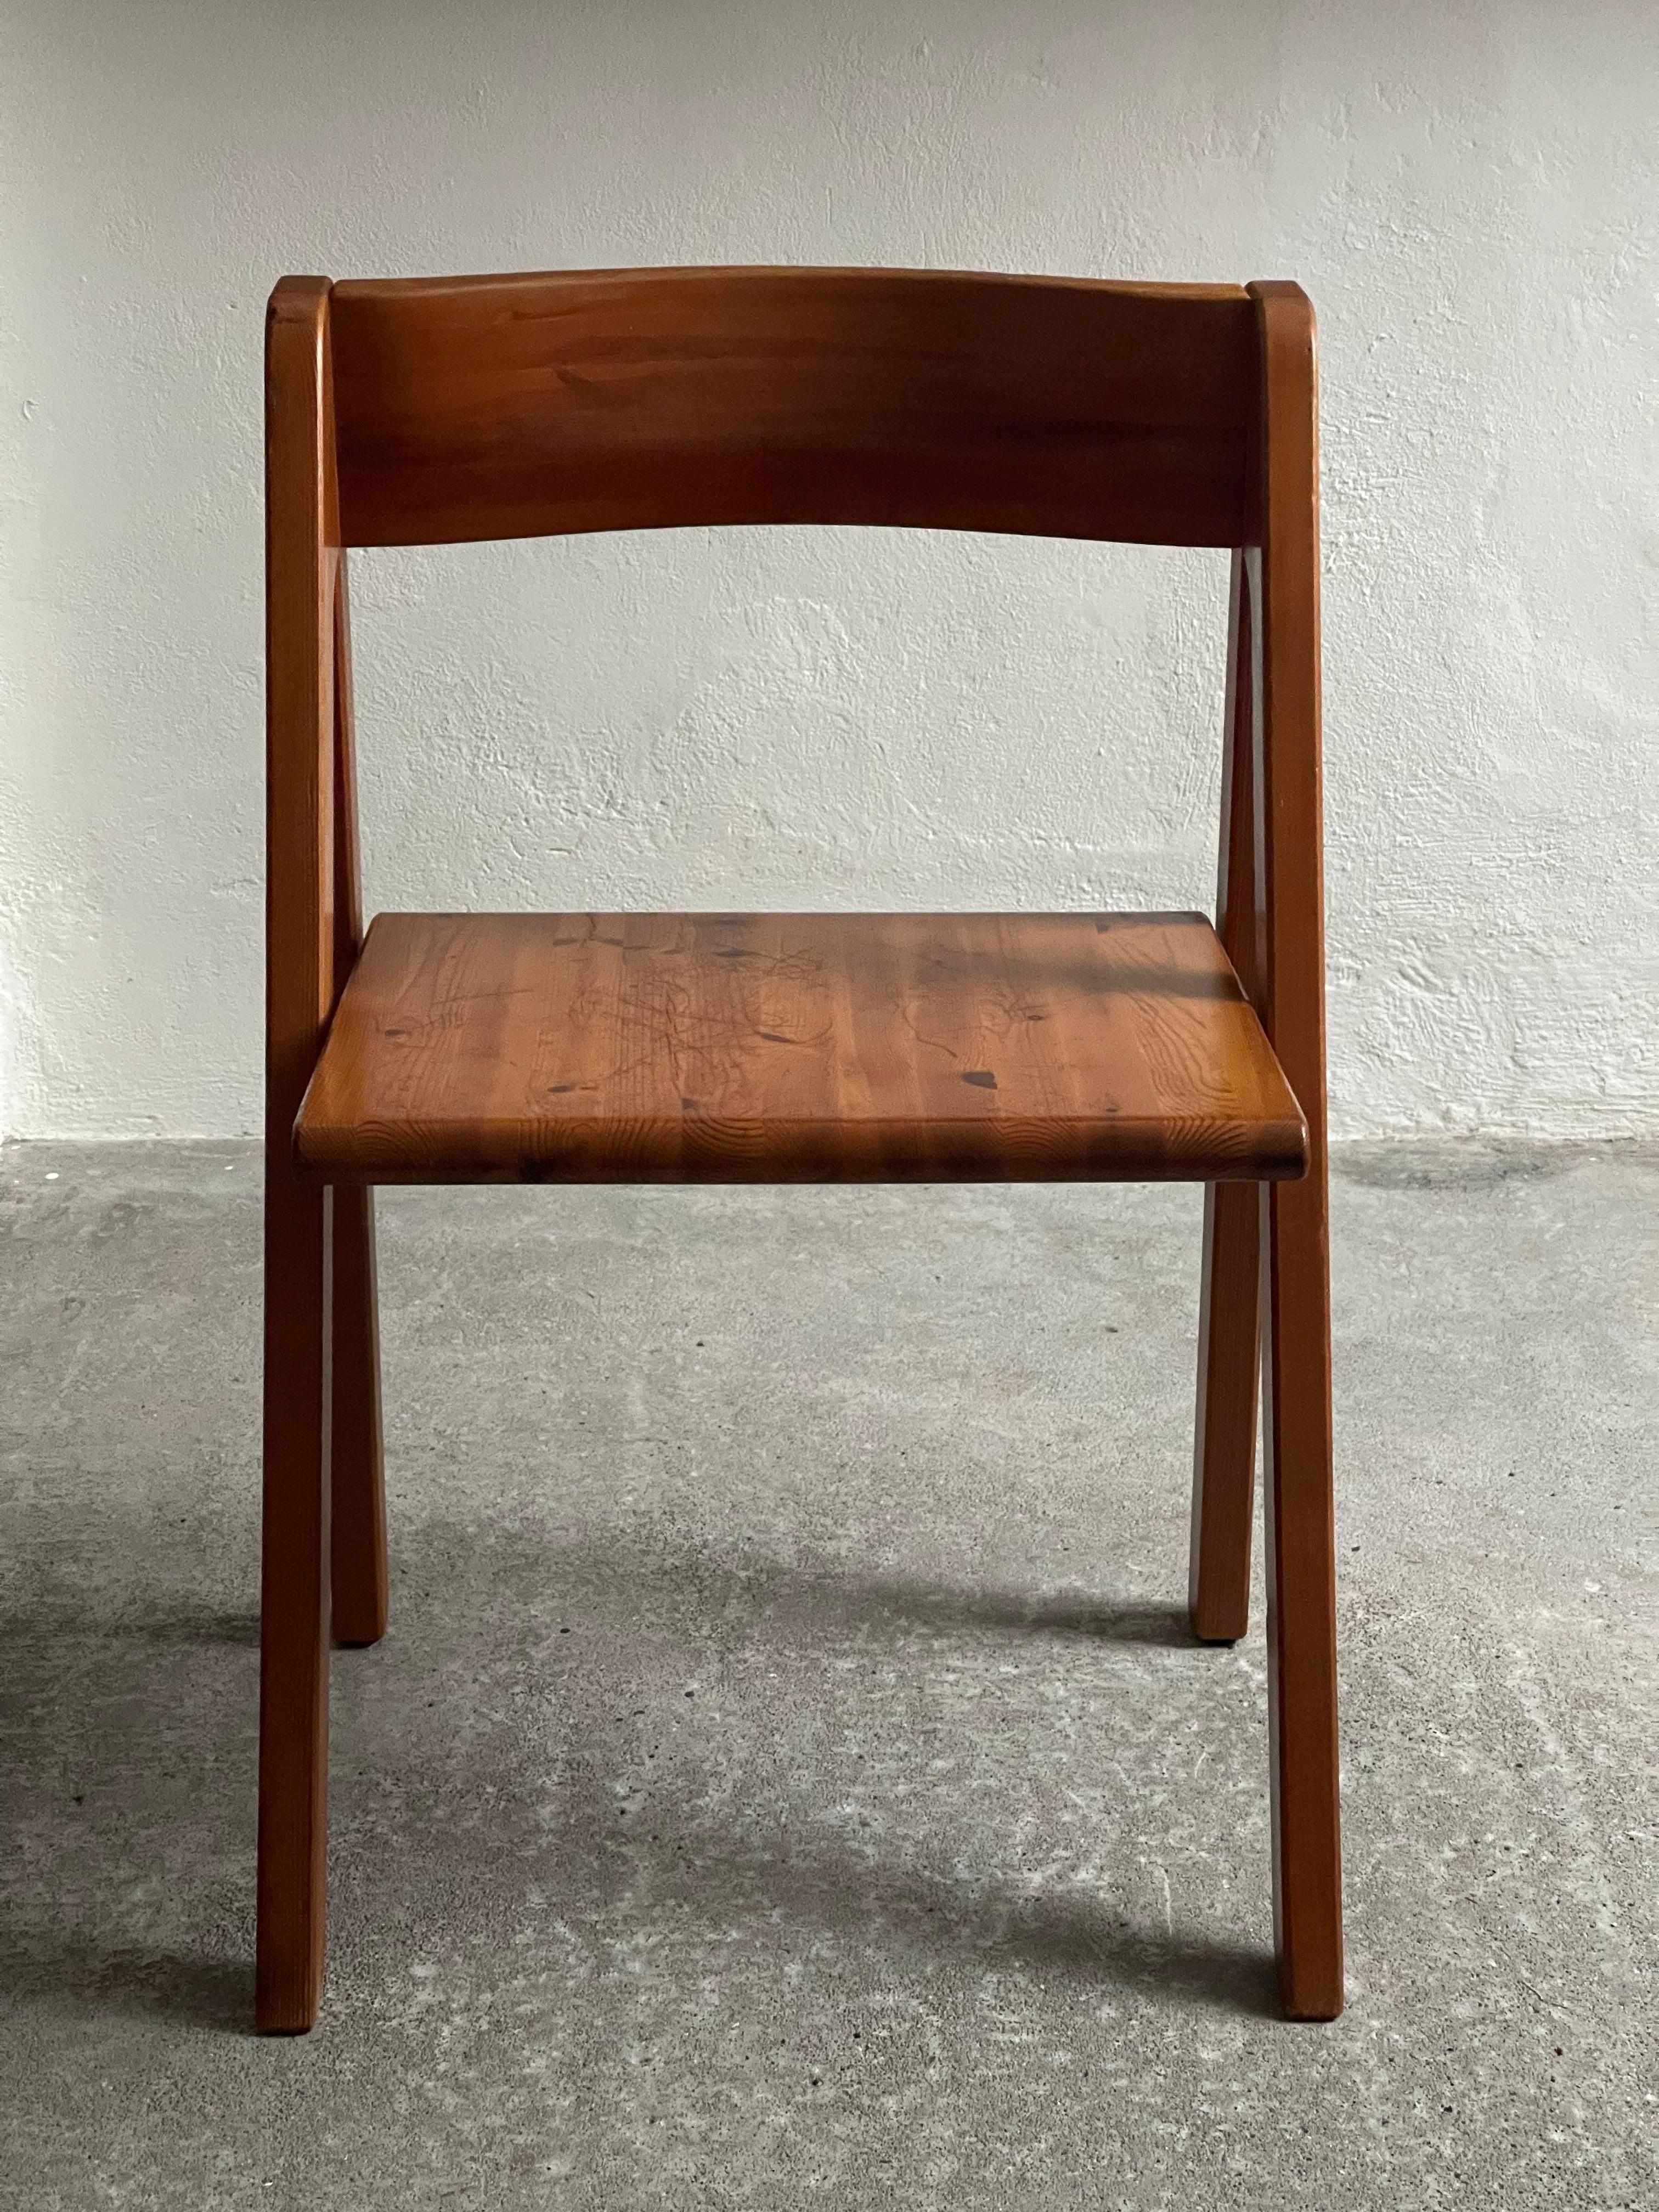 Late 20th Century Rare Danish Chair in Solid aged Pine by Nissen & Gehl 1970, Model: Fyrkat For Sale